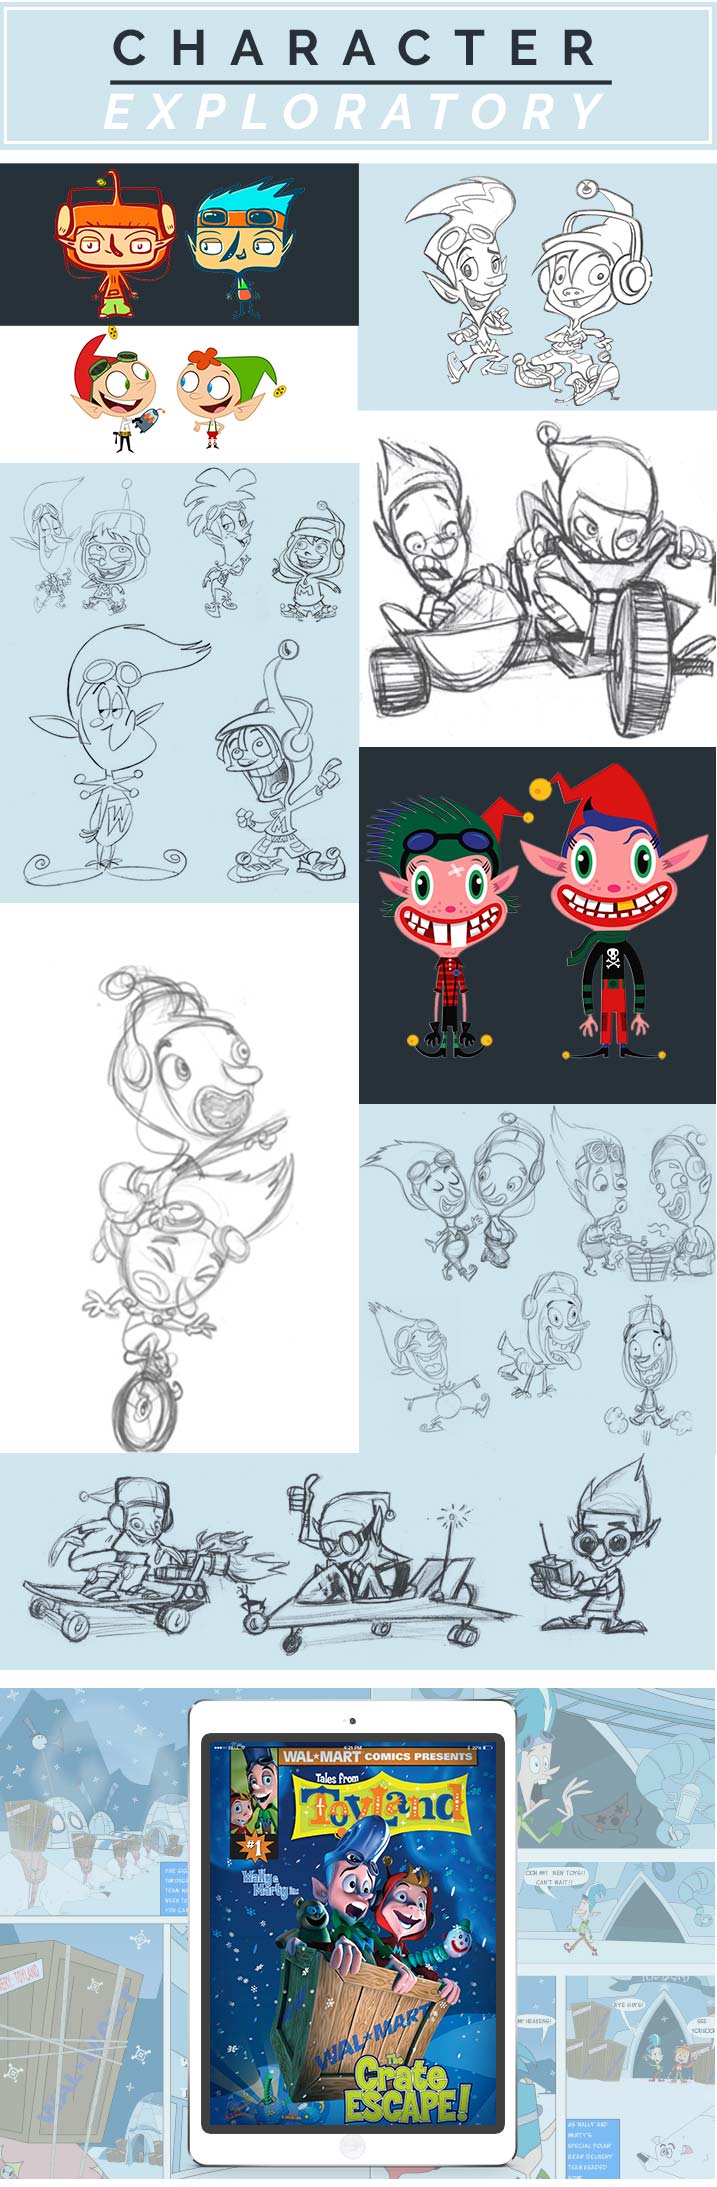 A series of drawings and sketches for cartoon characters.